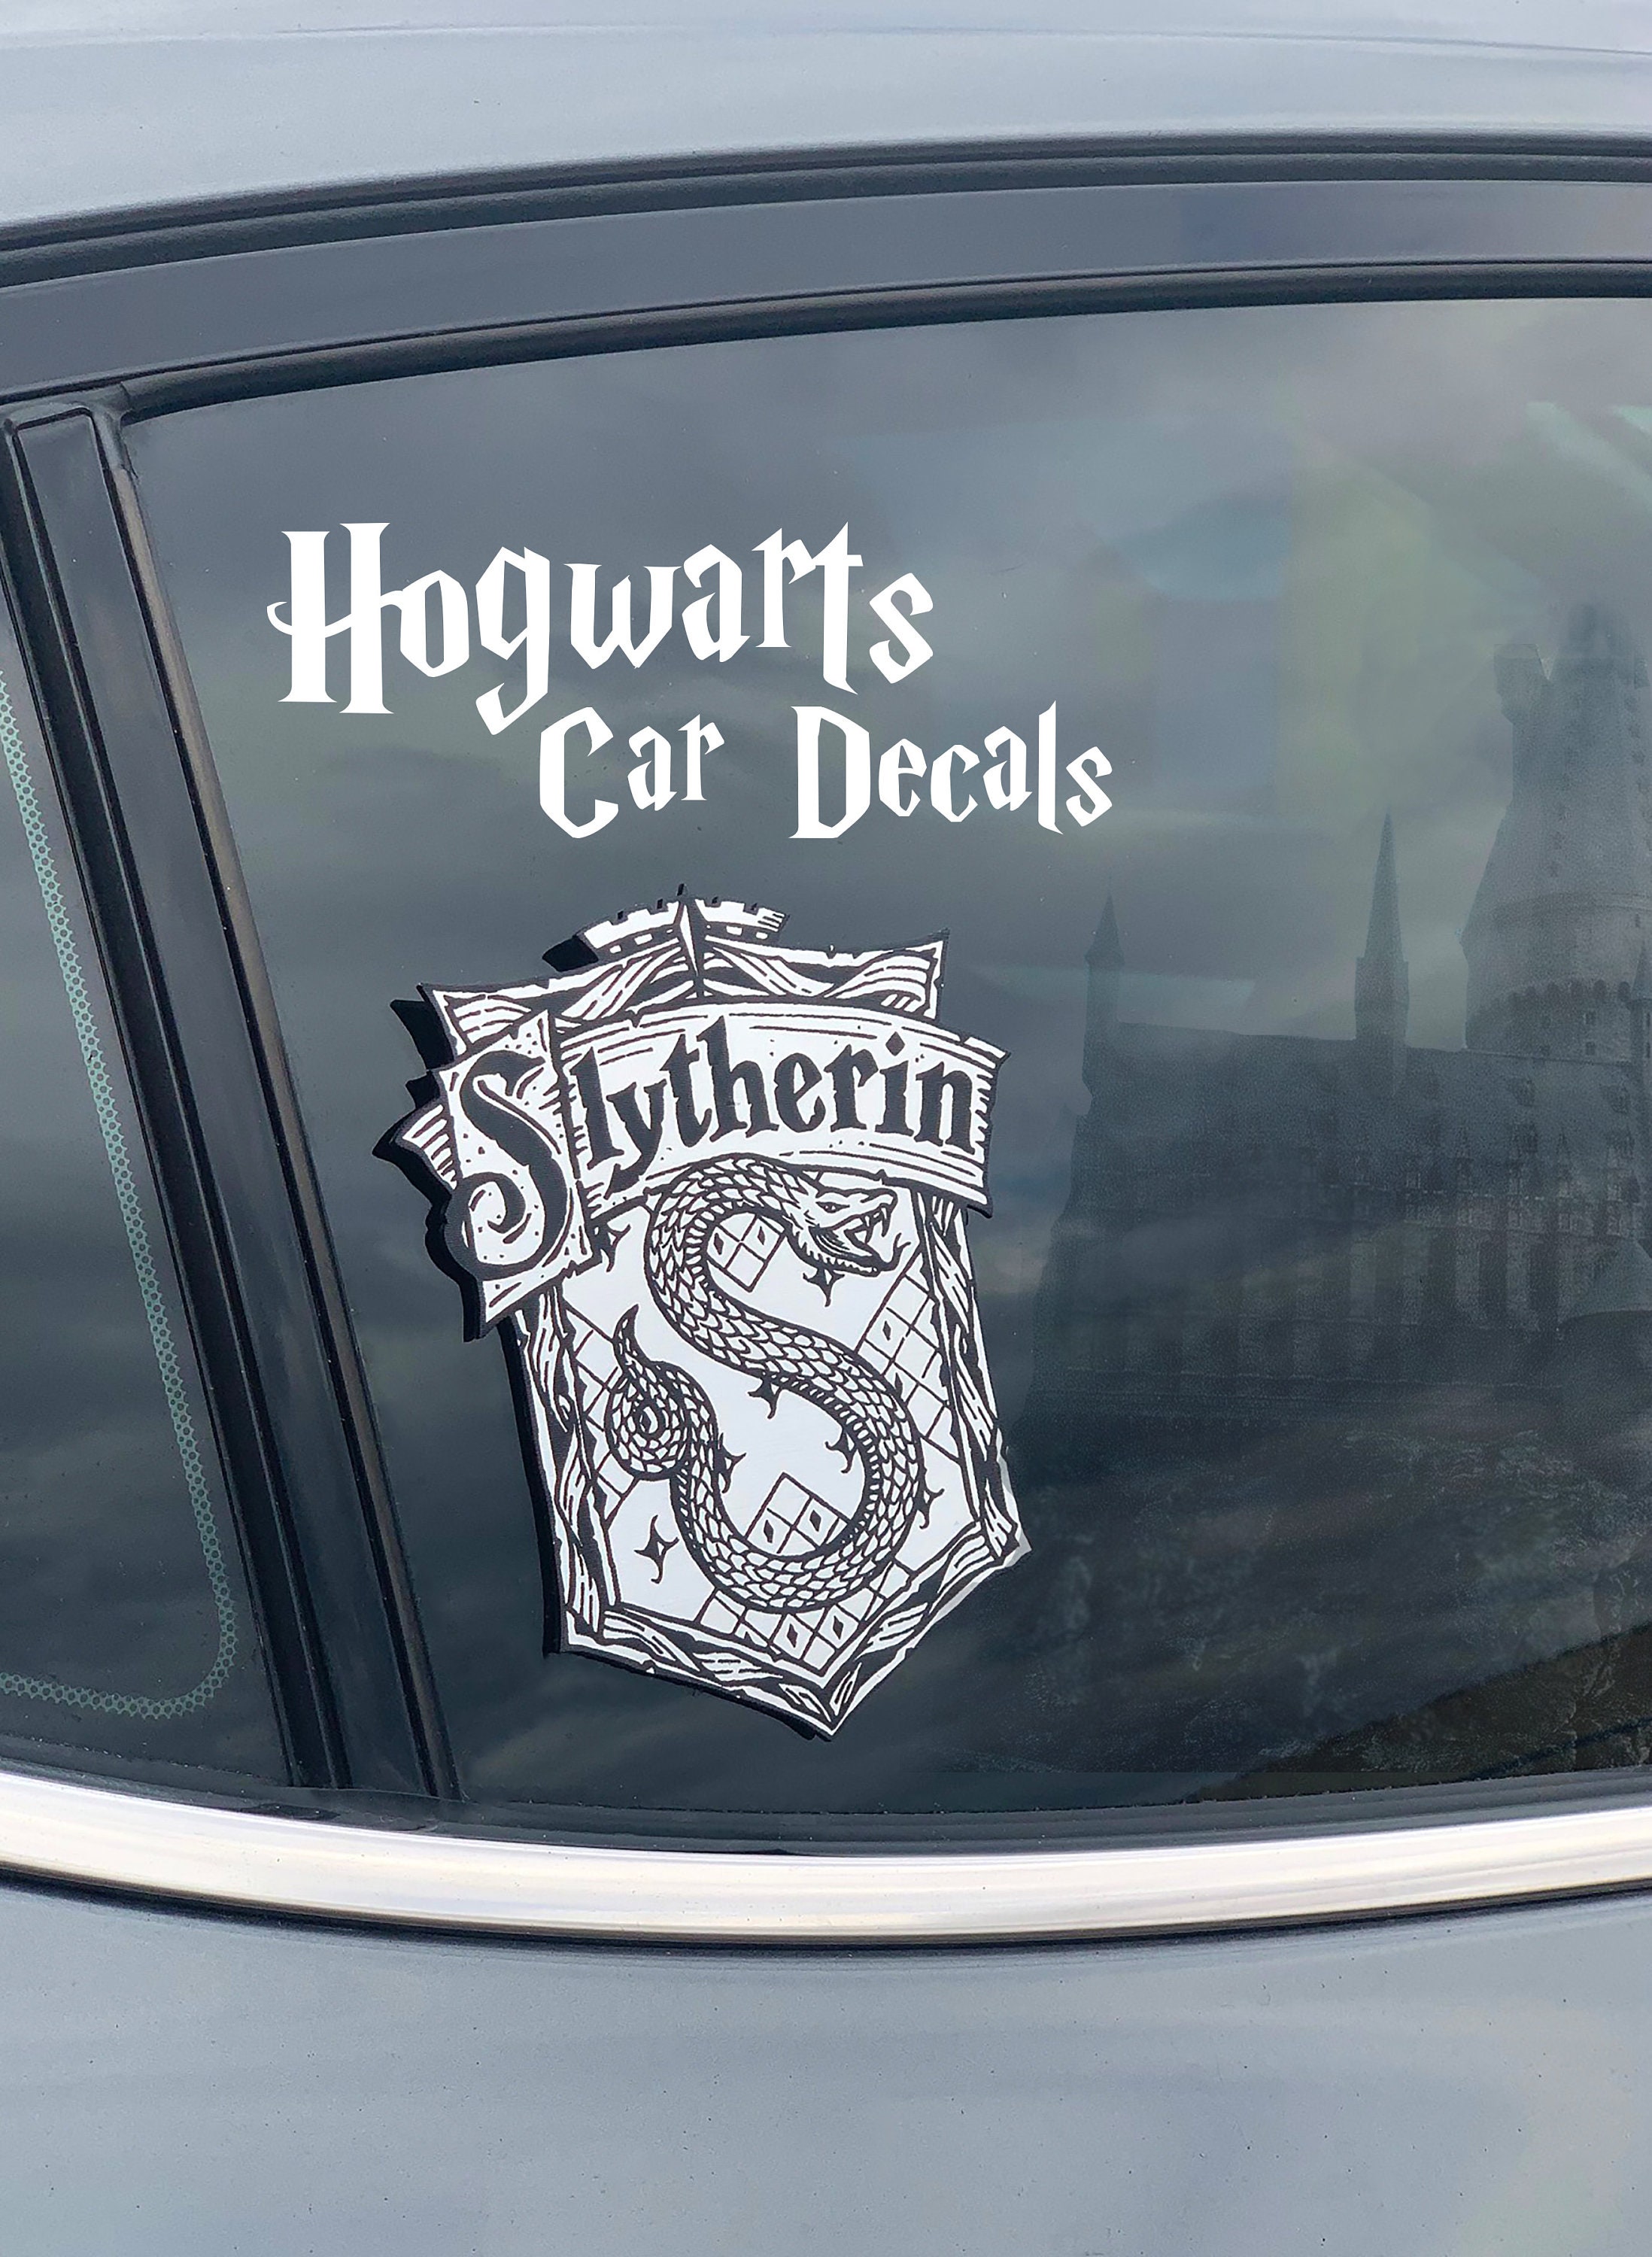 Harry Potter Hogwarts Houses Sticker Set Of 5 Vinyl Stickers Decals Official